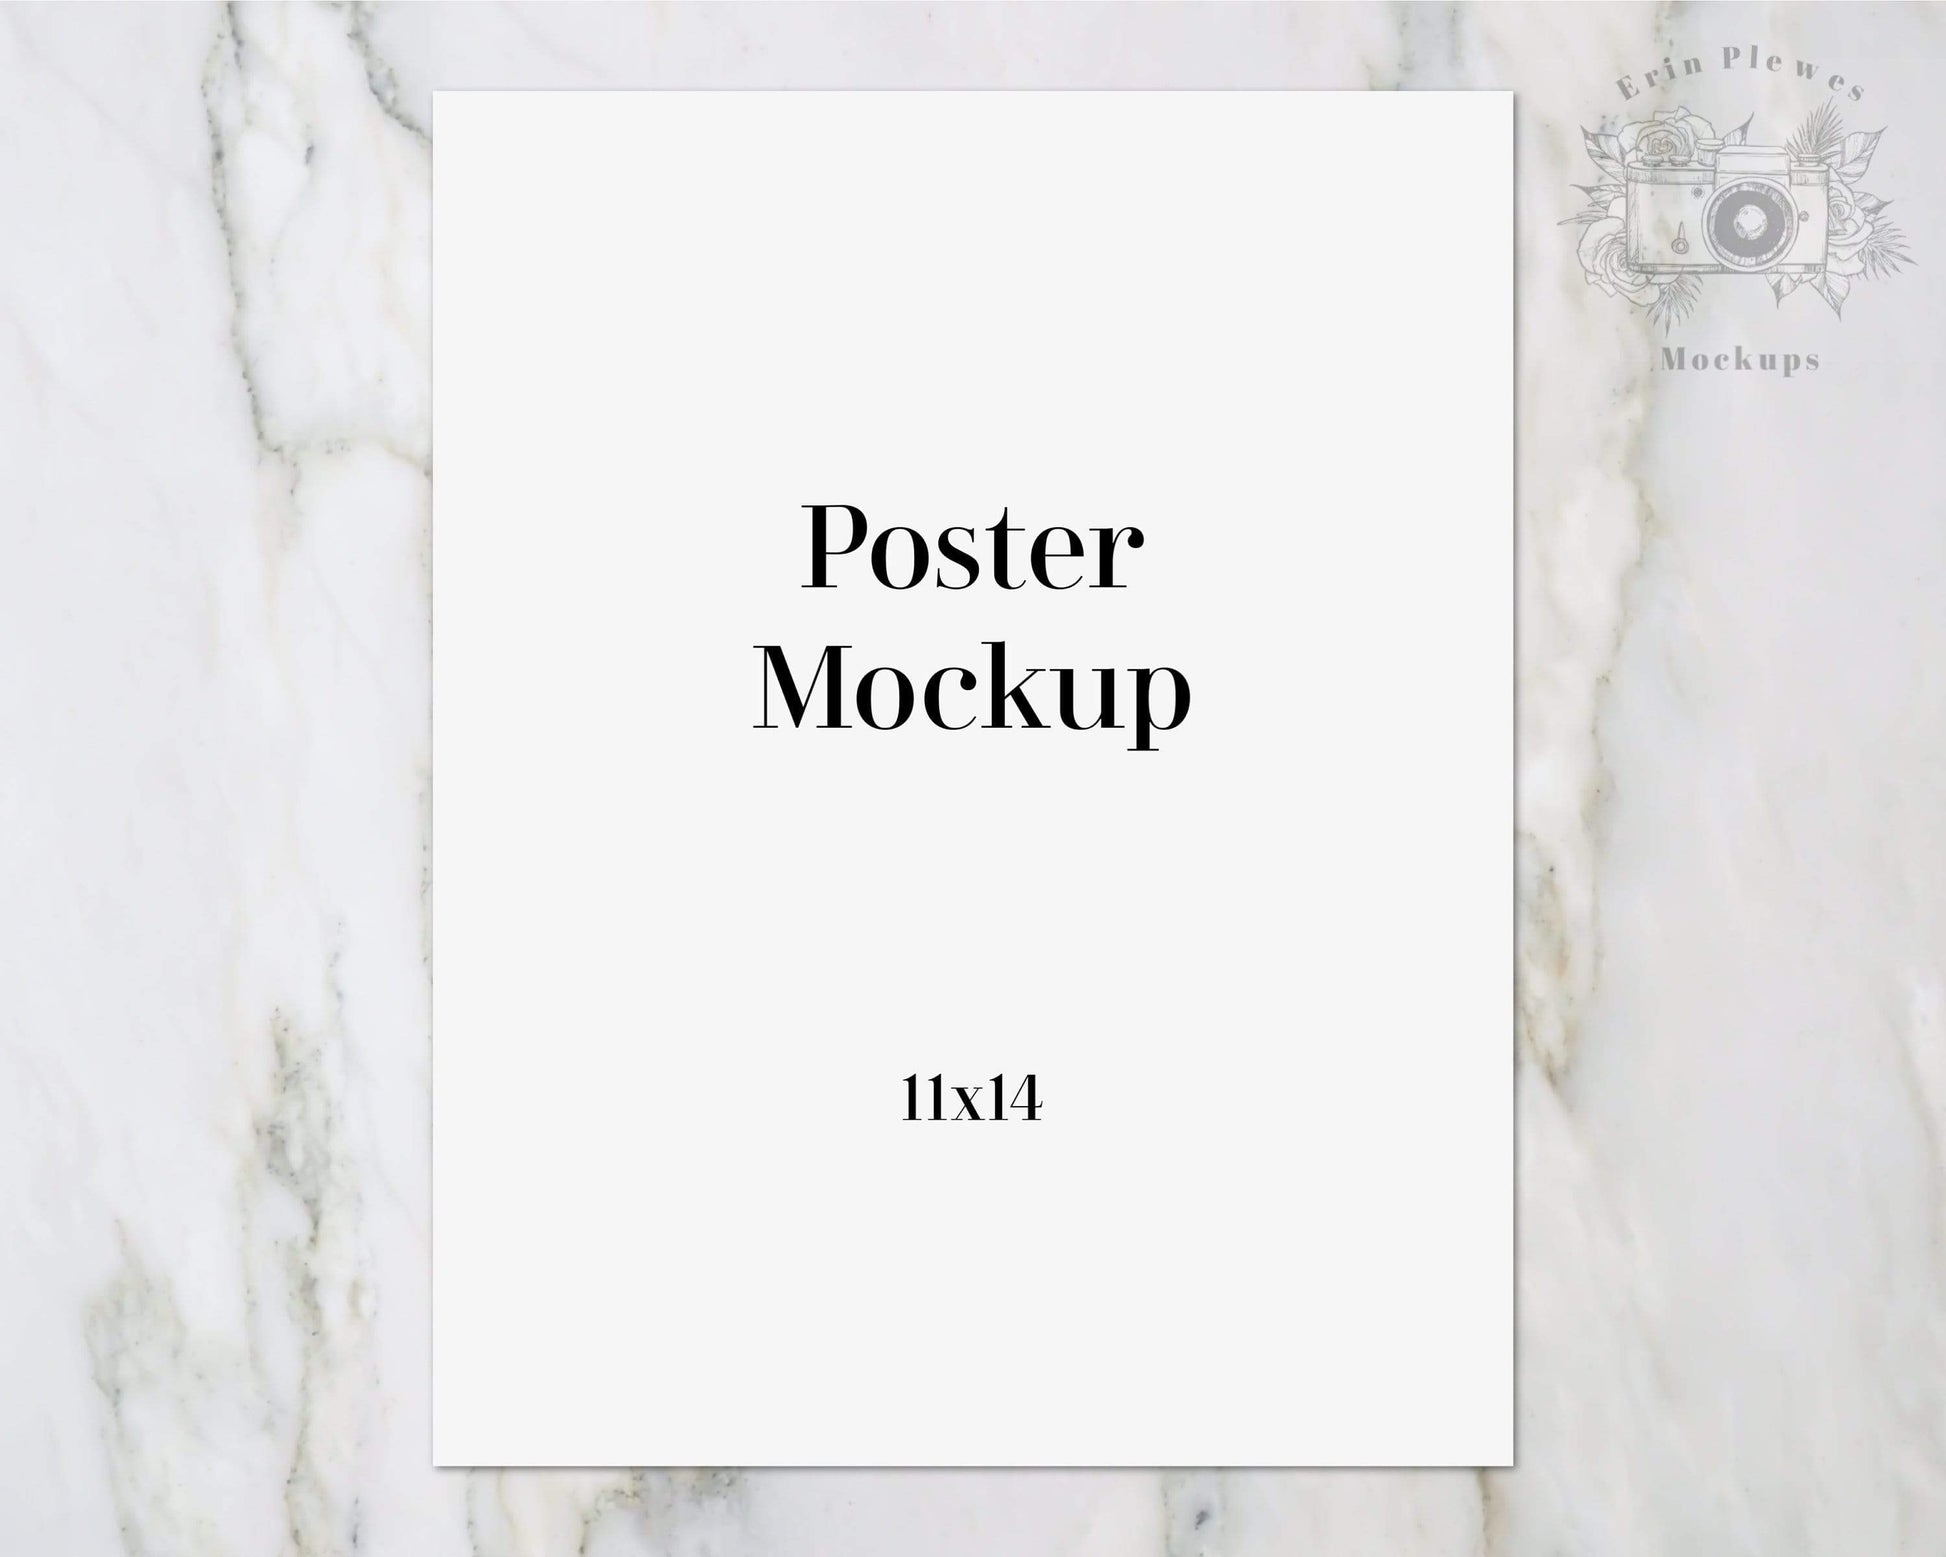 Erin Plewes Mockups 11x14 Poster Mockup, Print mock-up on gray marble lifestyle stock photo, Minimal Paper Mock up, Poster Flat Lay